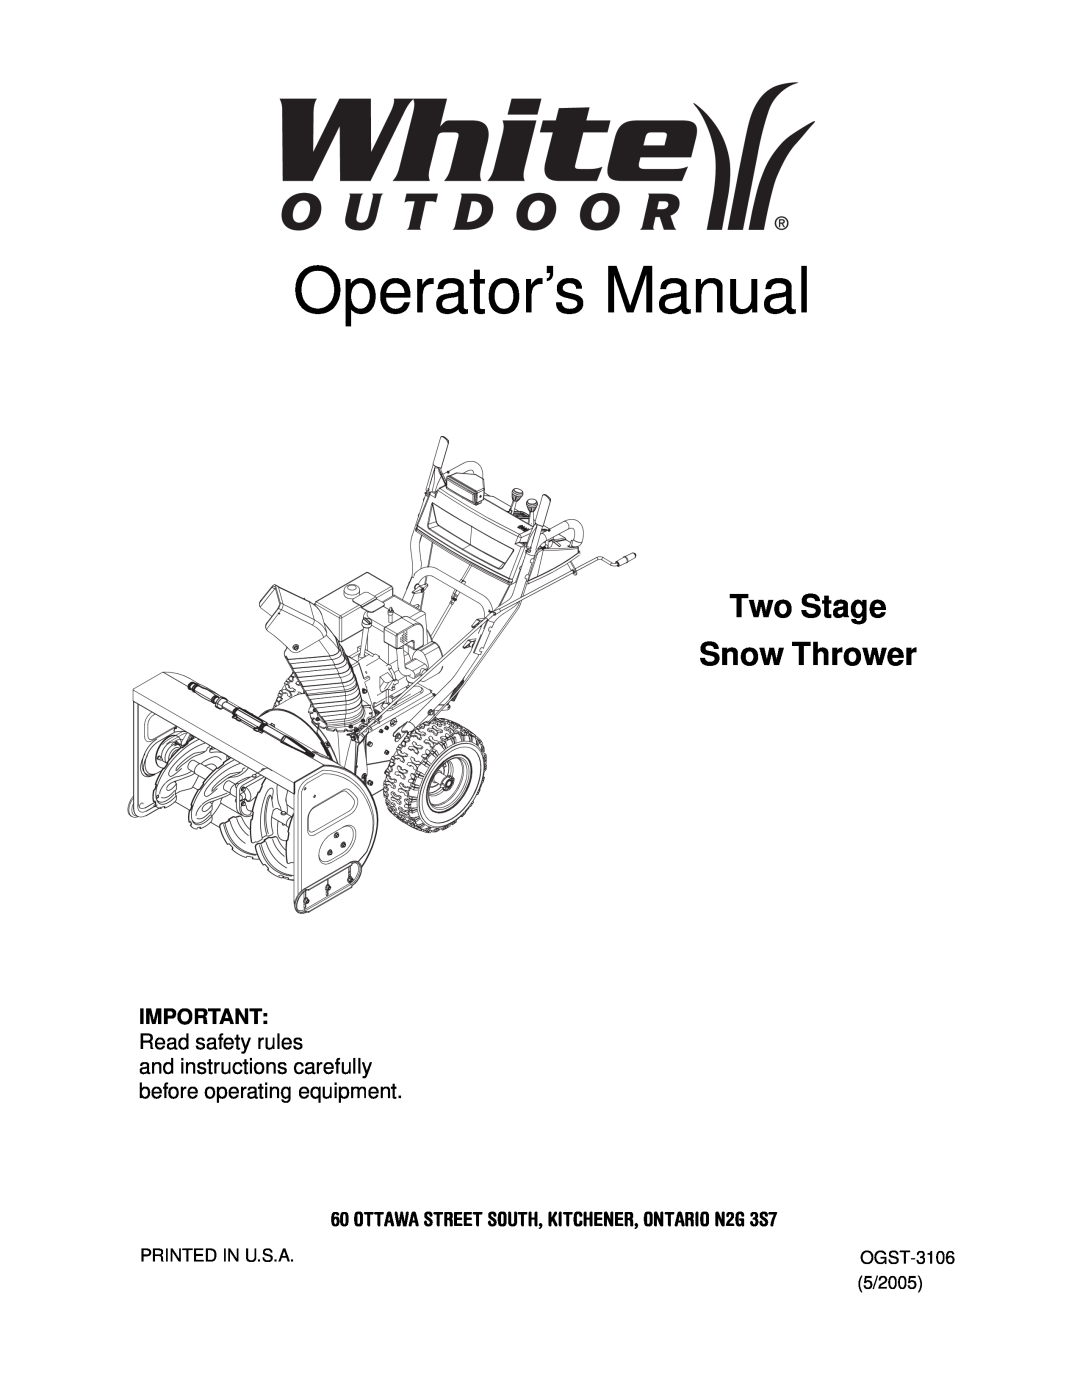 MTD OGST-3106 manual Operator’s Manual, Two Stage Snow Thrower, IMPORTANT Read safety rules 